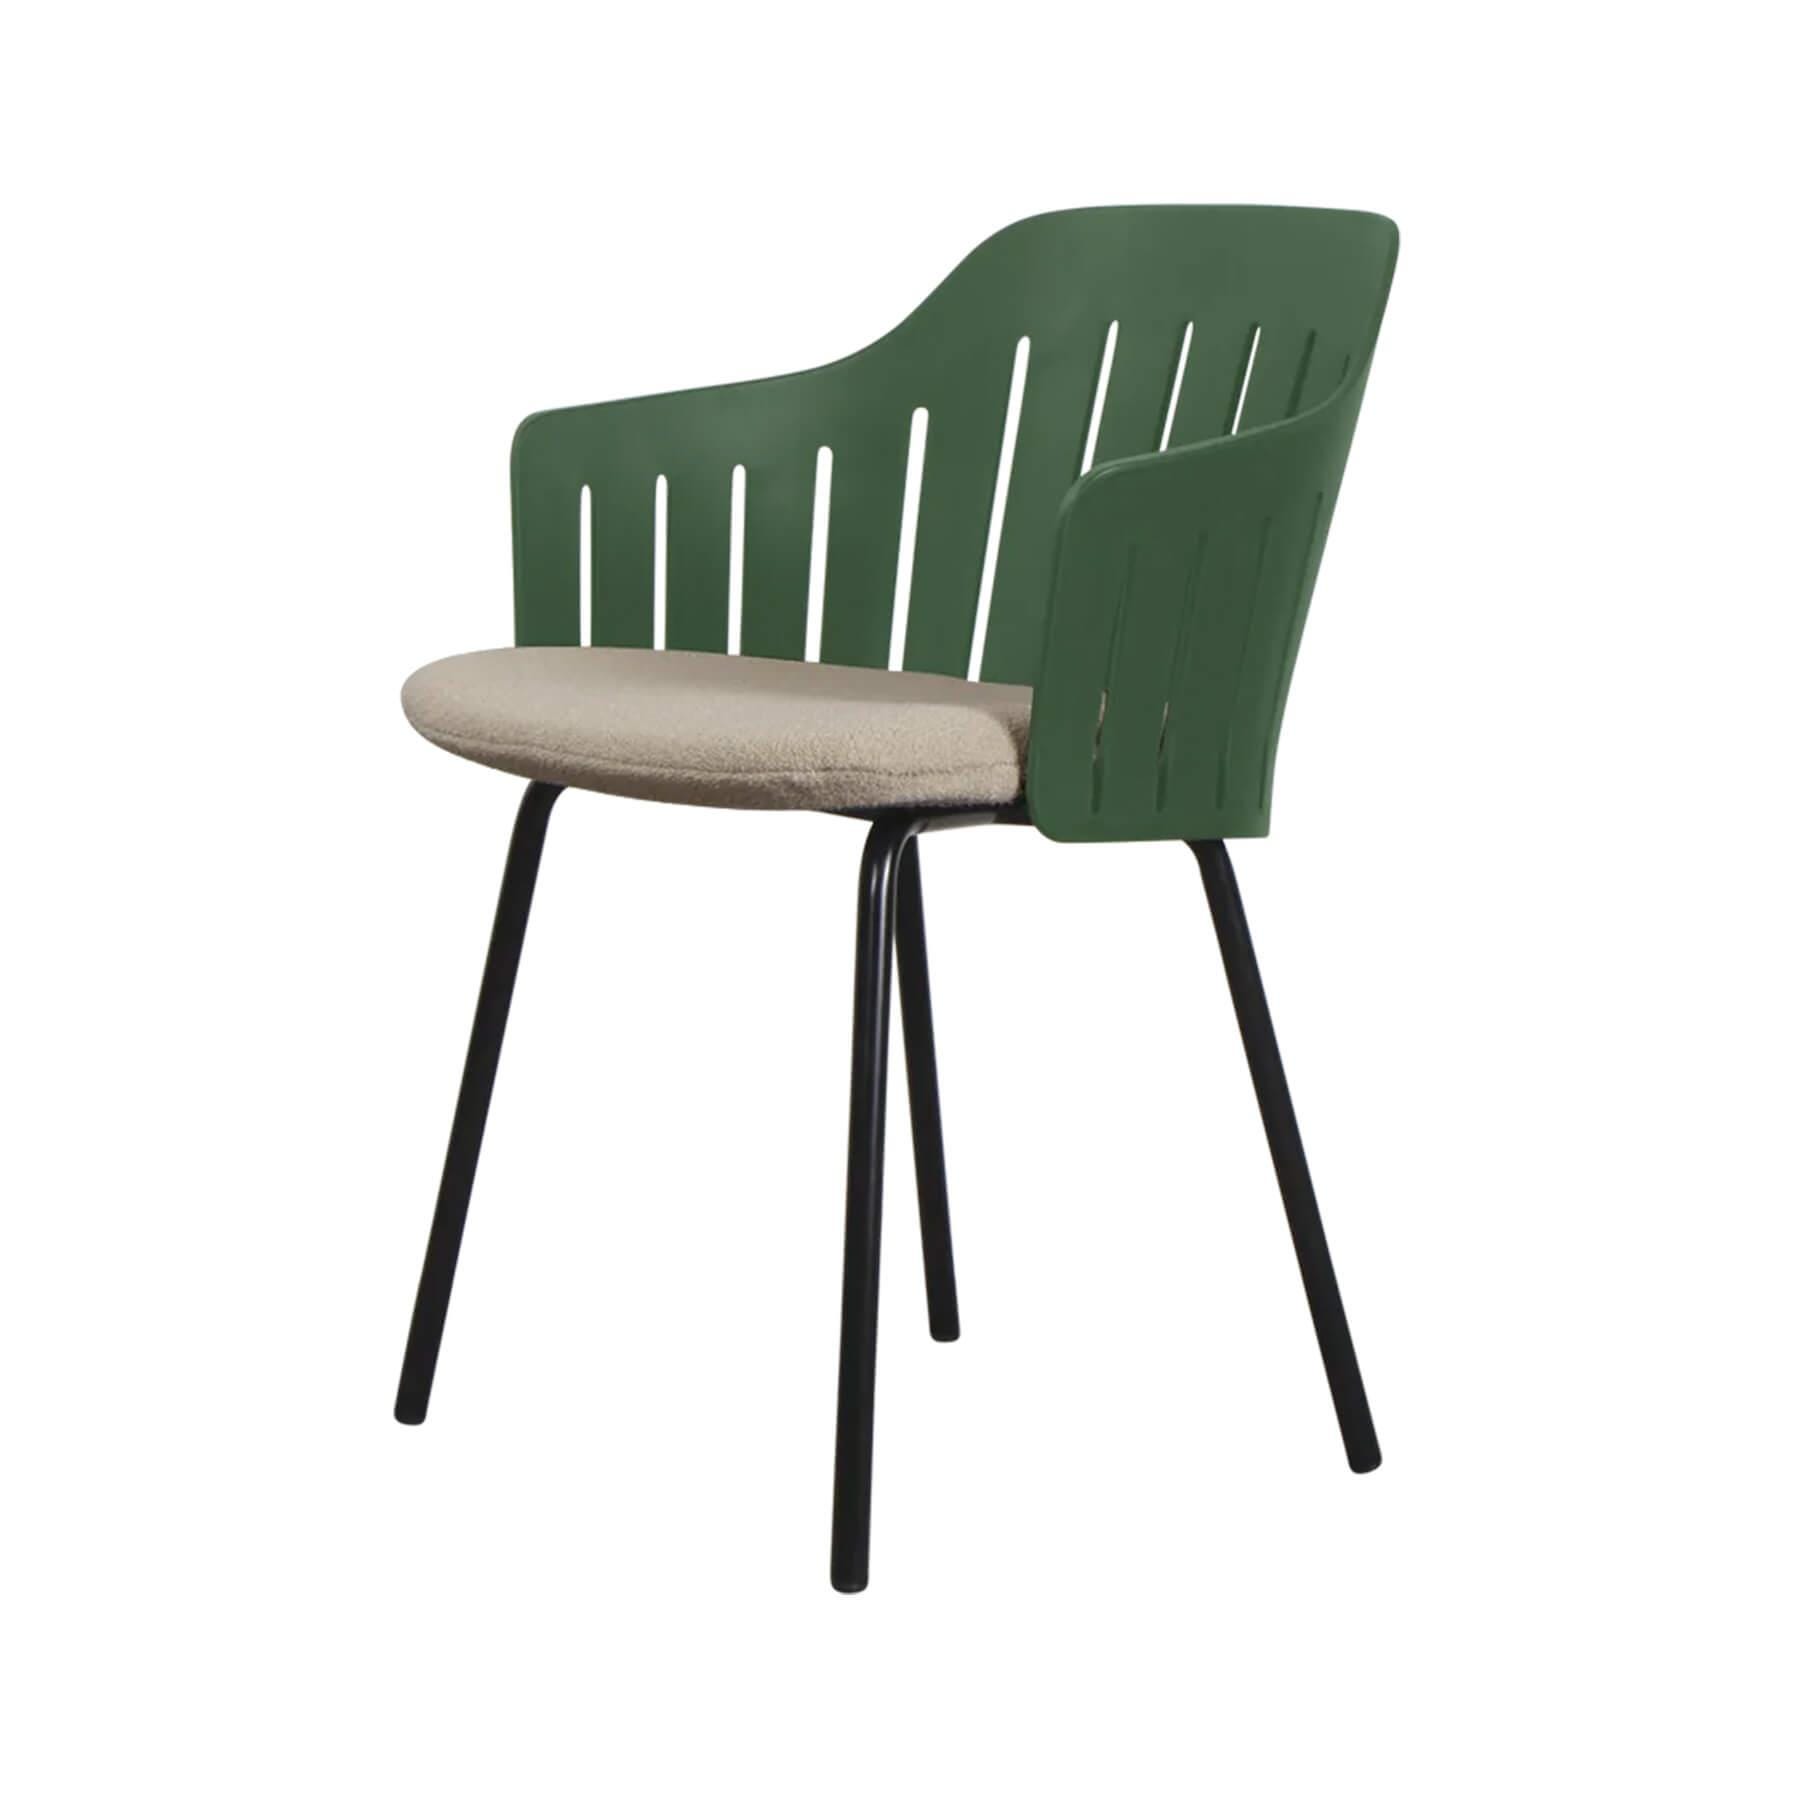 Caneline Choice Outdoor Chair With Steel Legs Dark Green Seat Taupe Cushion